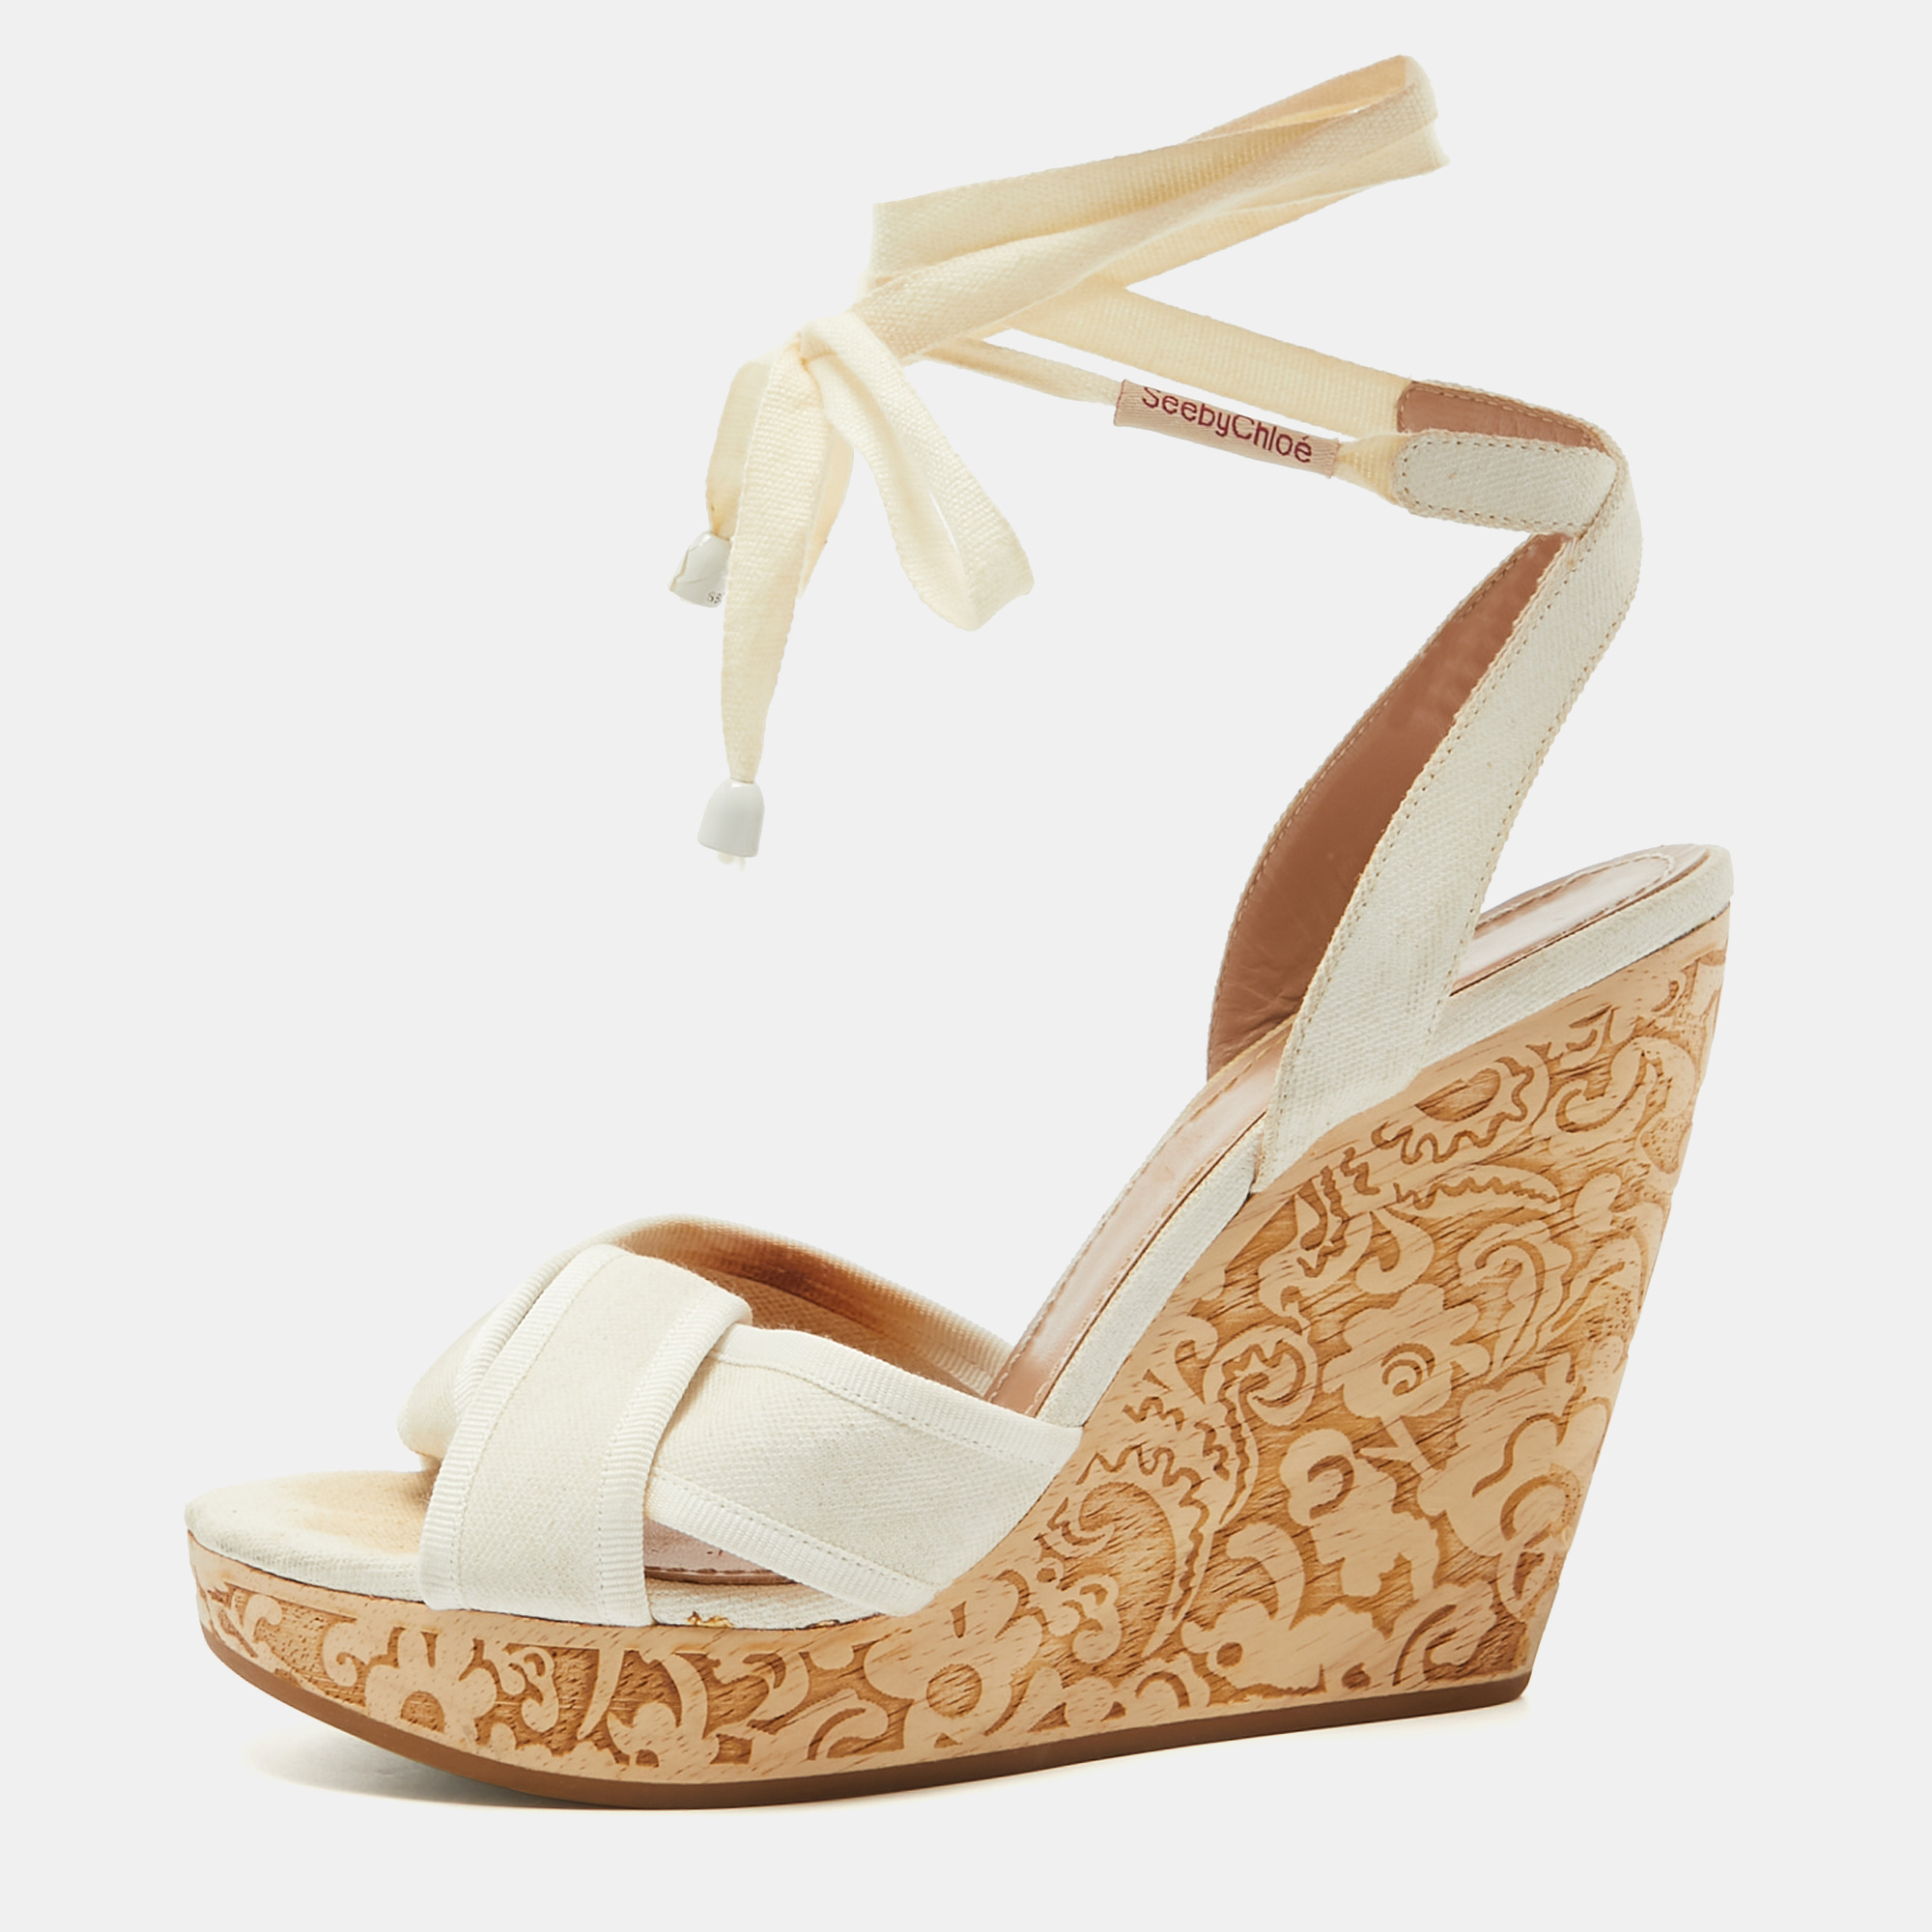 Pre-owned See By Chloé White Canvas Wedges Platform Ankle Wrap Sandals Size 39